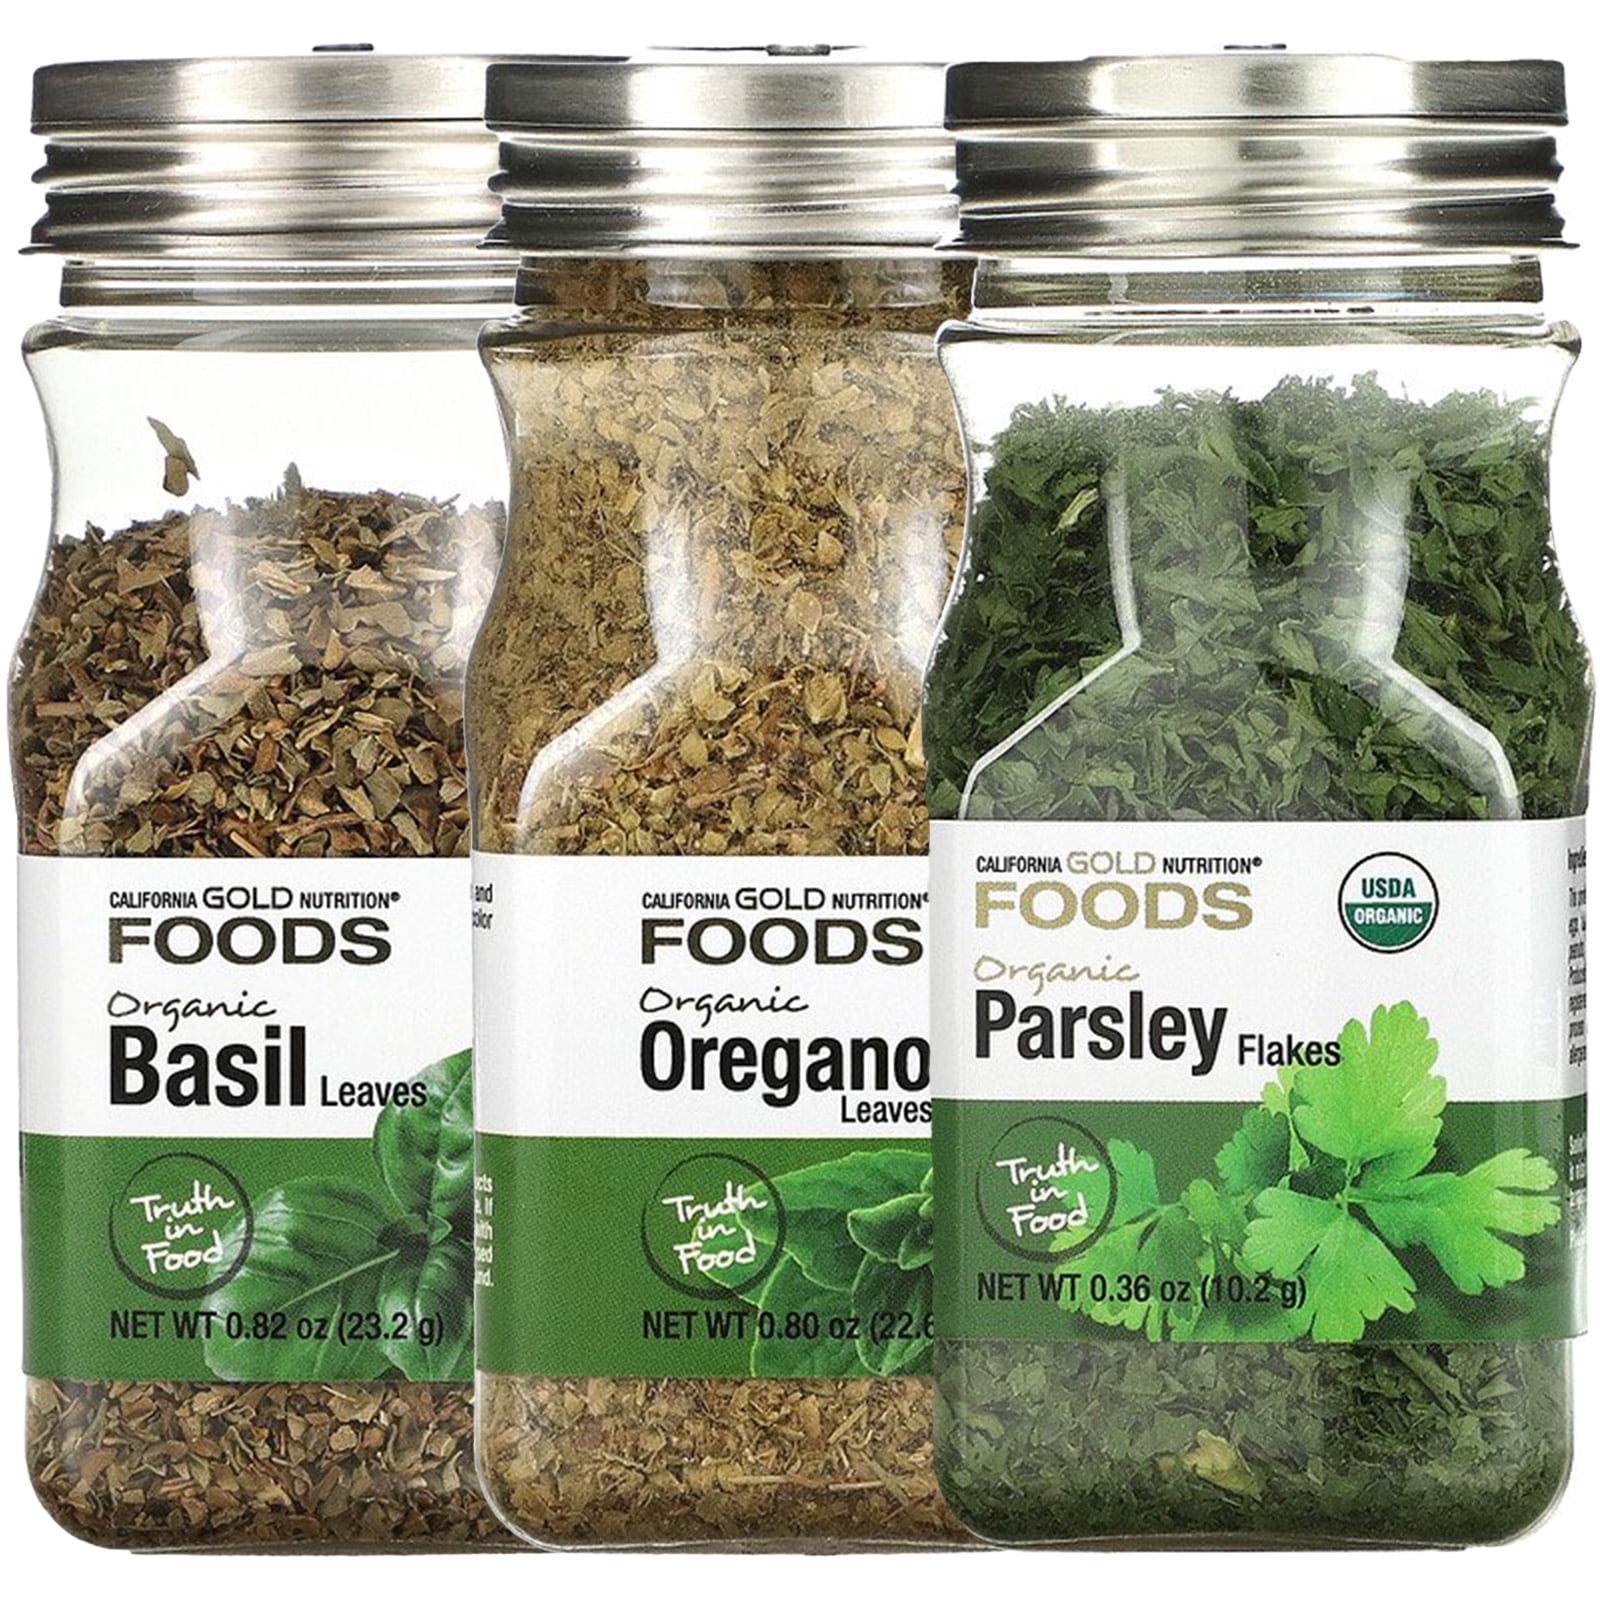 Simply Organic Seasoning and Herb Glass Jar Starter Kit - 24 Pack - Gift  Set for Someone Who Loves to Cook - Get Your Spice Rack Stocked With These